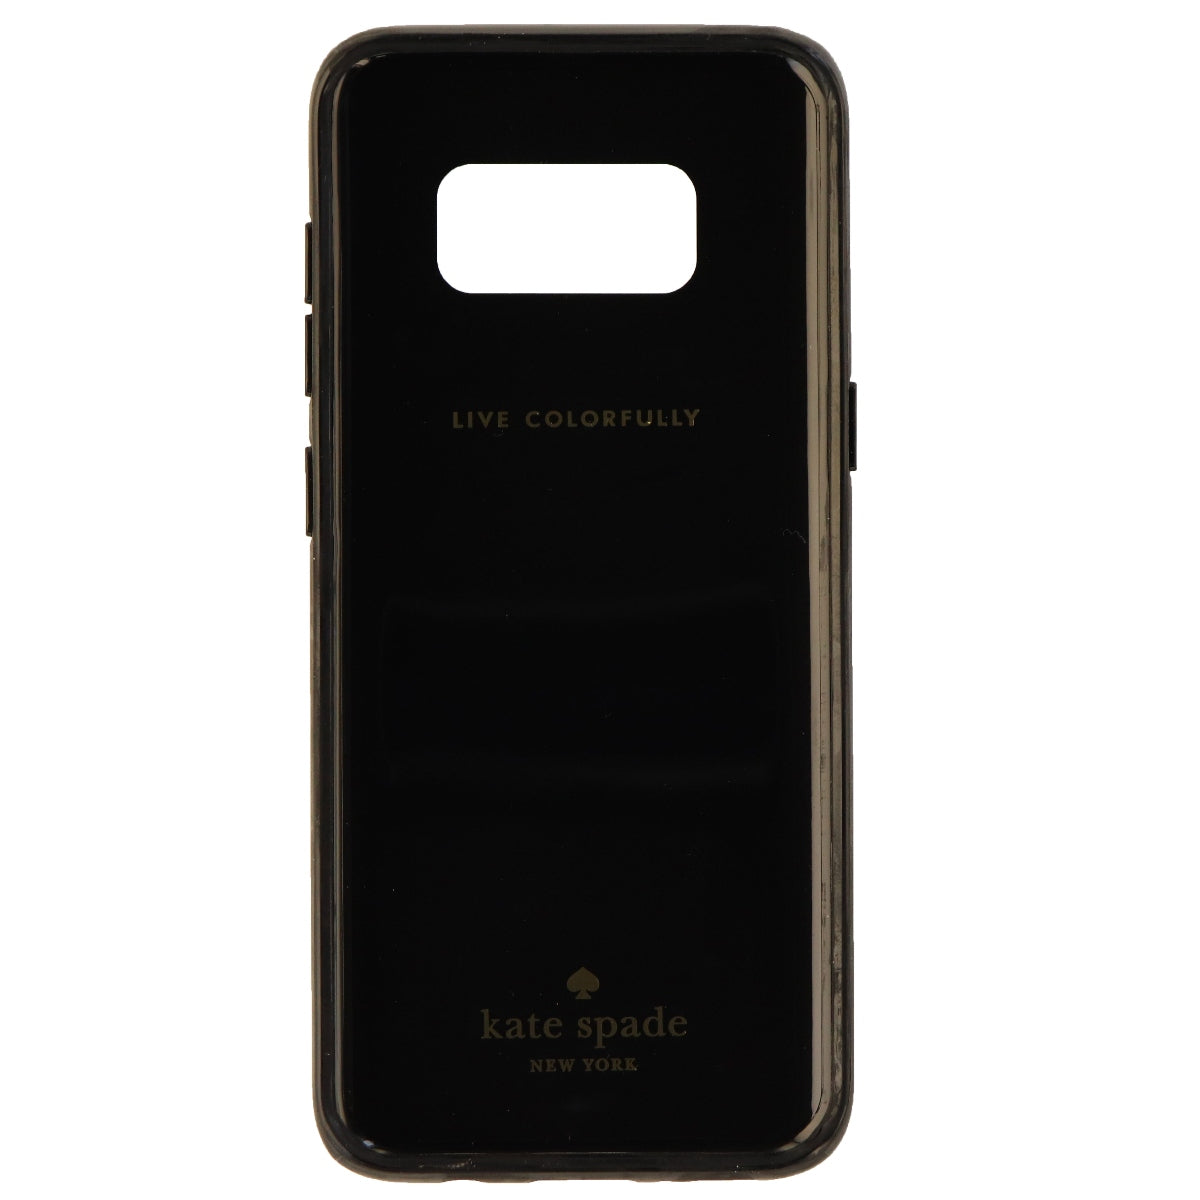 Kate Spade New York Hardshell Case for Galaxy S8 - Black White Gold Stripes Cell Phone - Cases, Covers & Skins Kate Spade    - Simple Cell Bulk Wholesale Pricing - USA Seller